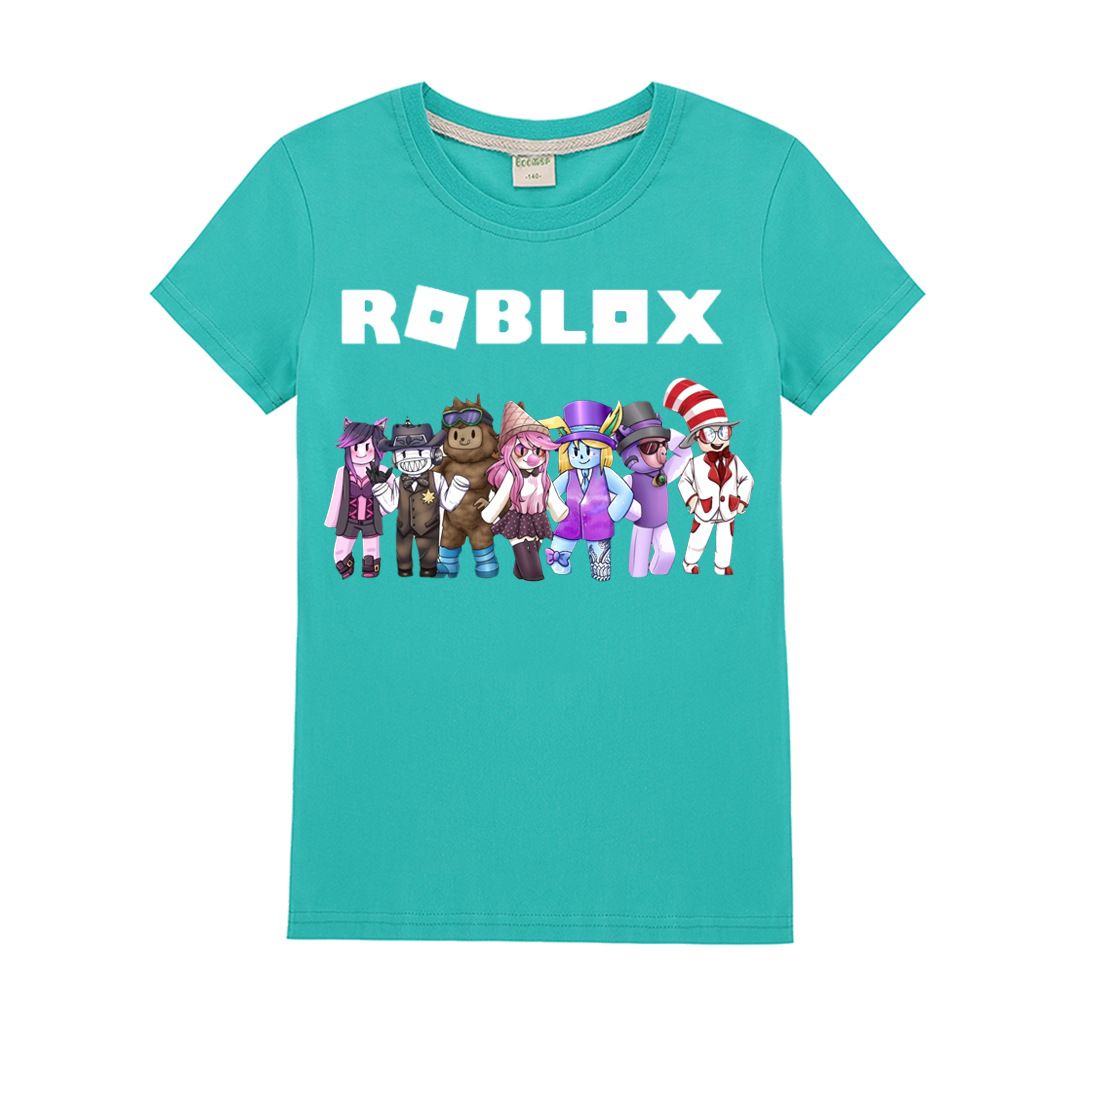 2020 Summer 2020 Roblox Tees Kids Designer Clothes Boys Teenage Girls Clothing Cotton Short Sleeve Girls Shirt T Shirt From Baby0512 13 77 Dhgate Com - cheap cool roblox outfits for girls